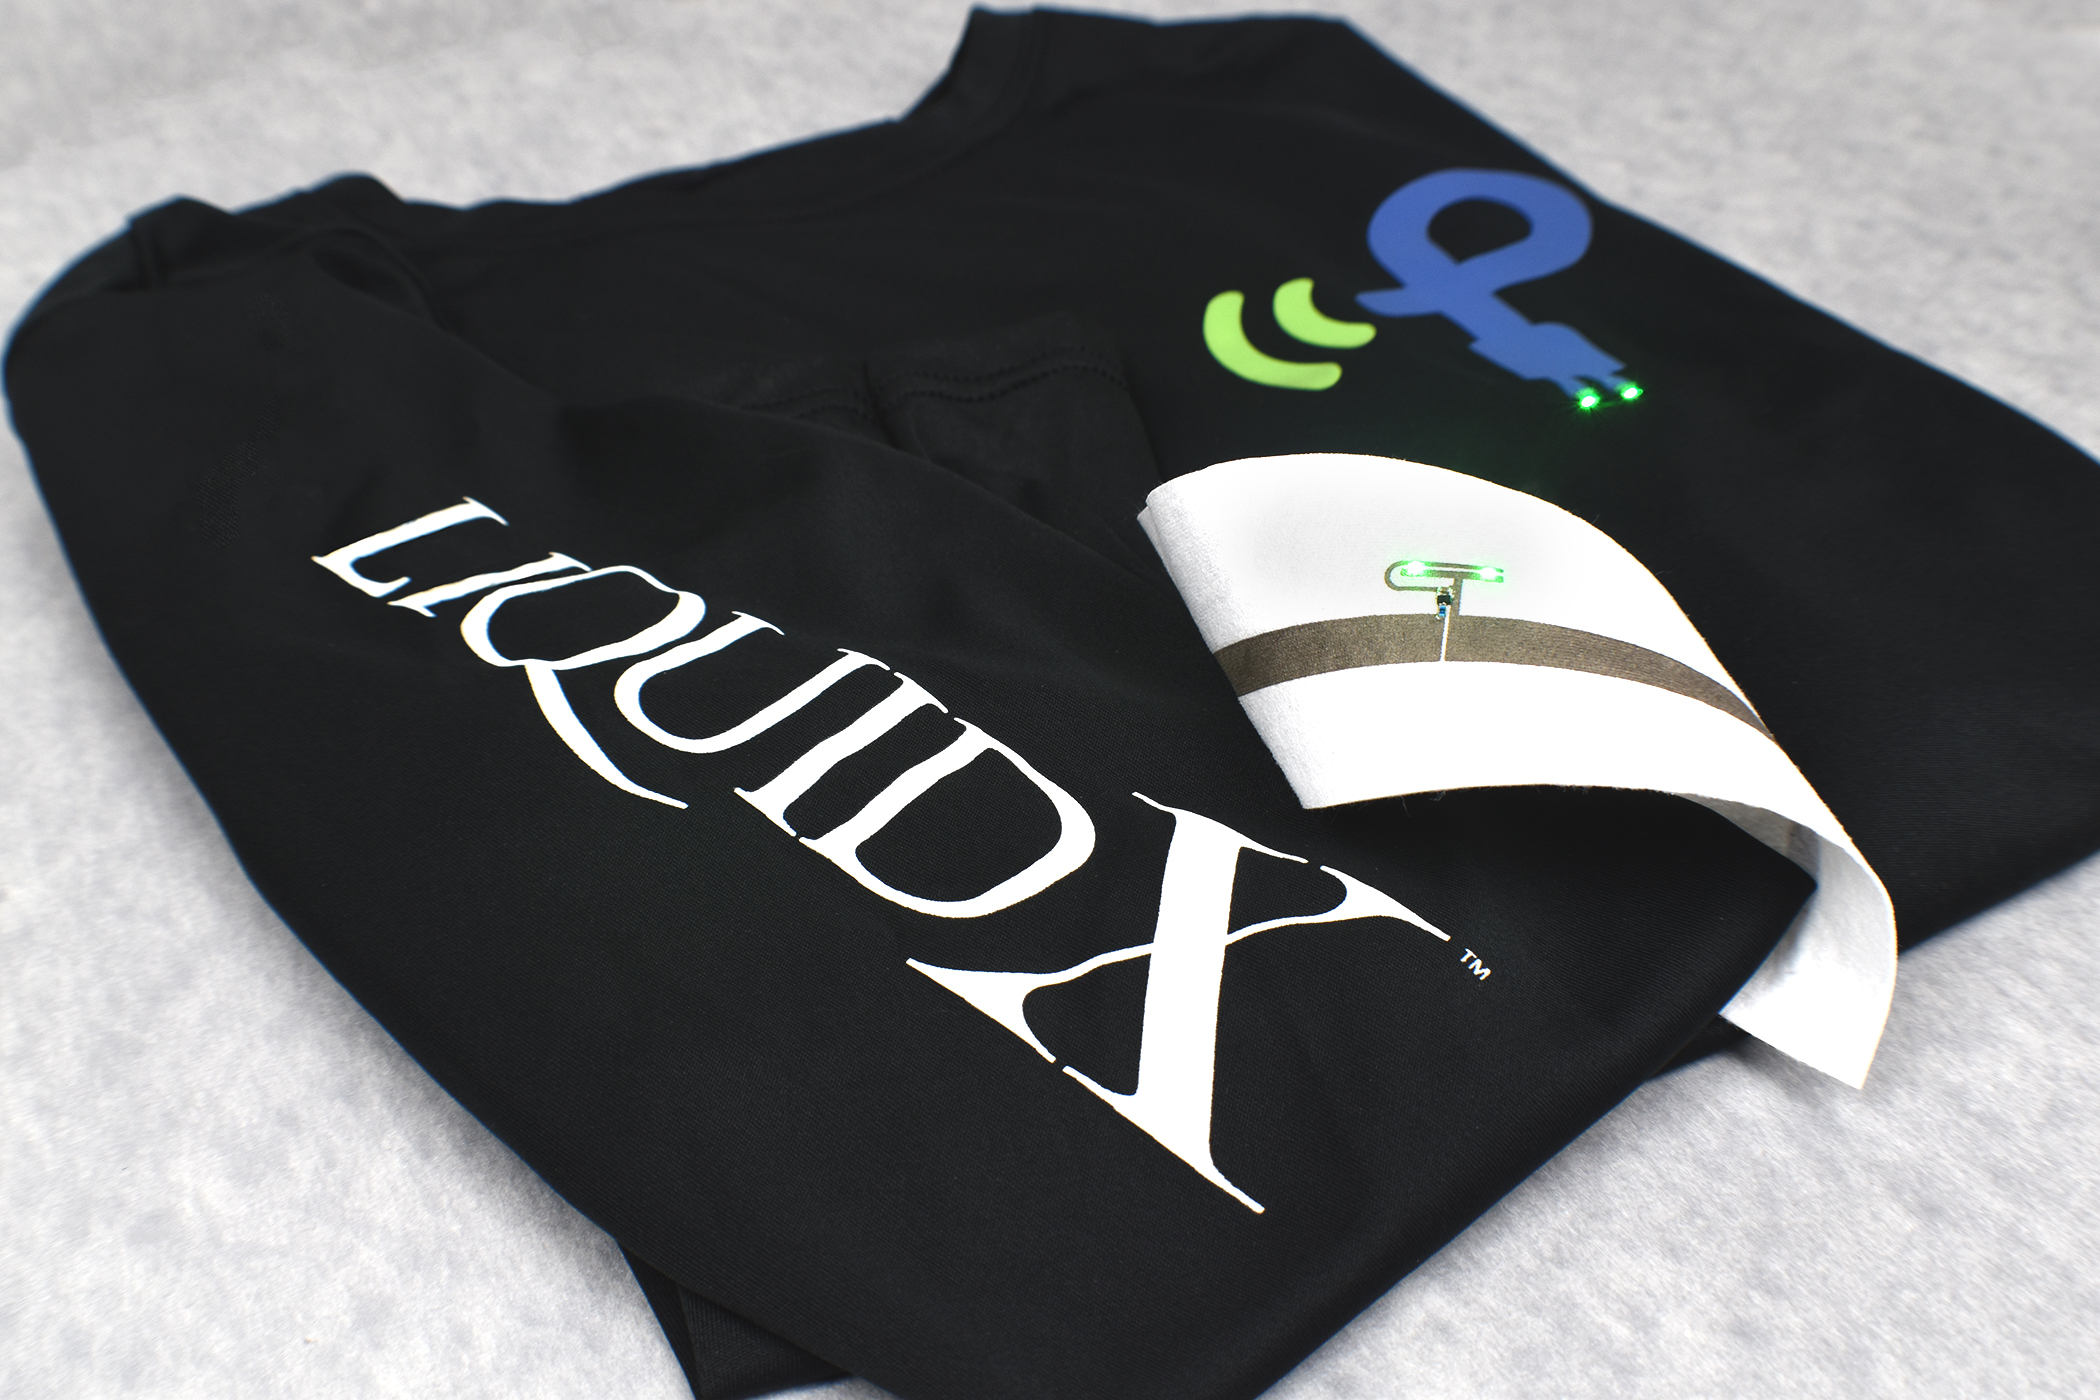 Manufacturers can integrate wireless charging electronics into garments using Liquid X’s conductive inks to print circuitry on fabric, mount components onto printed traces, then apply an encapsulant.